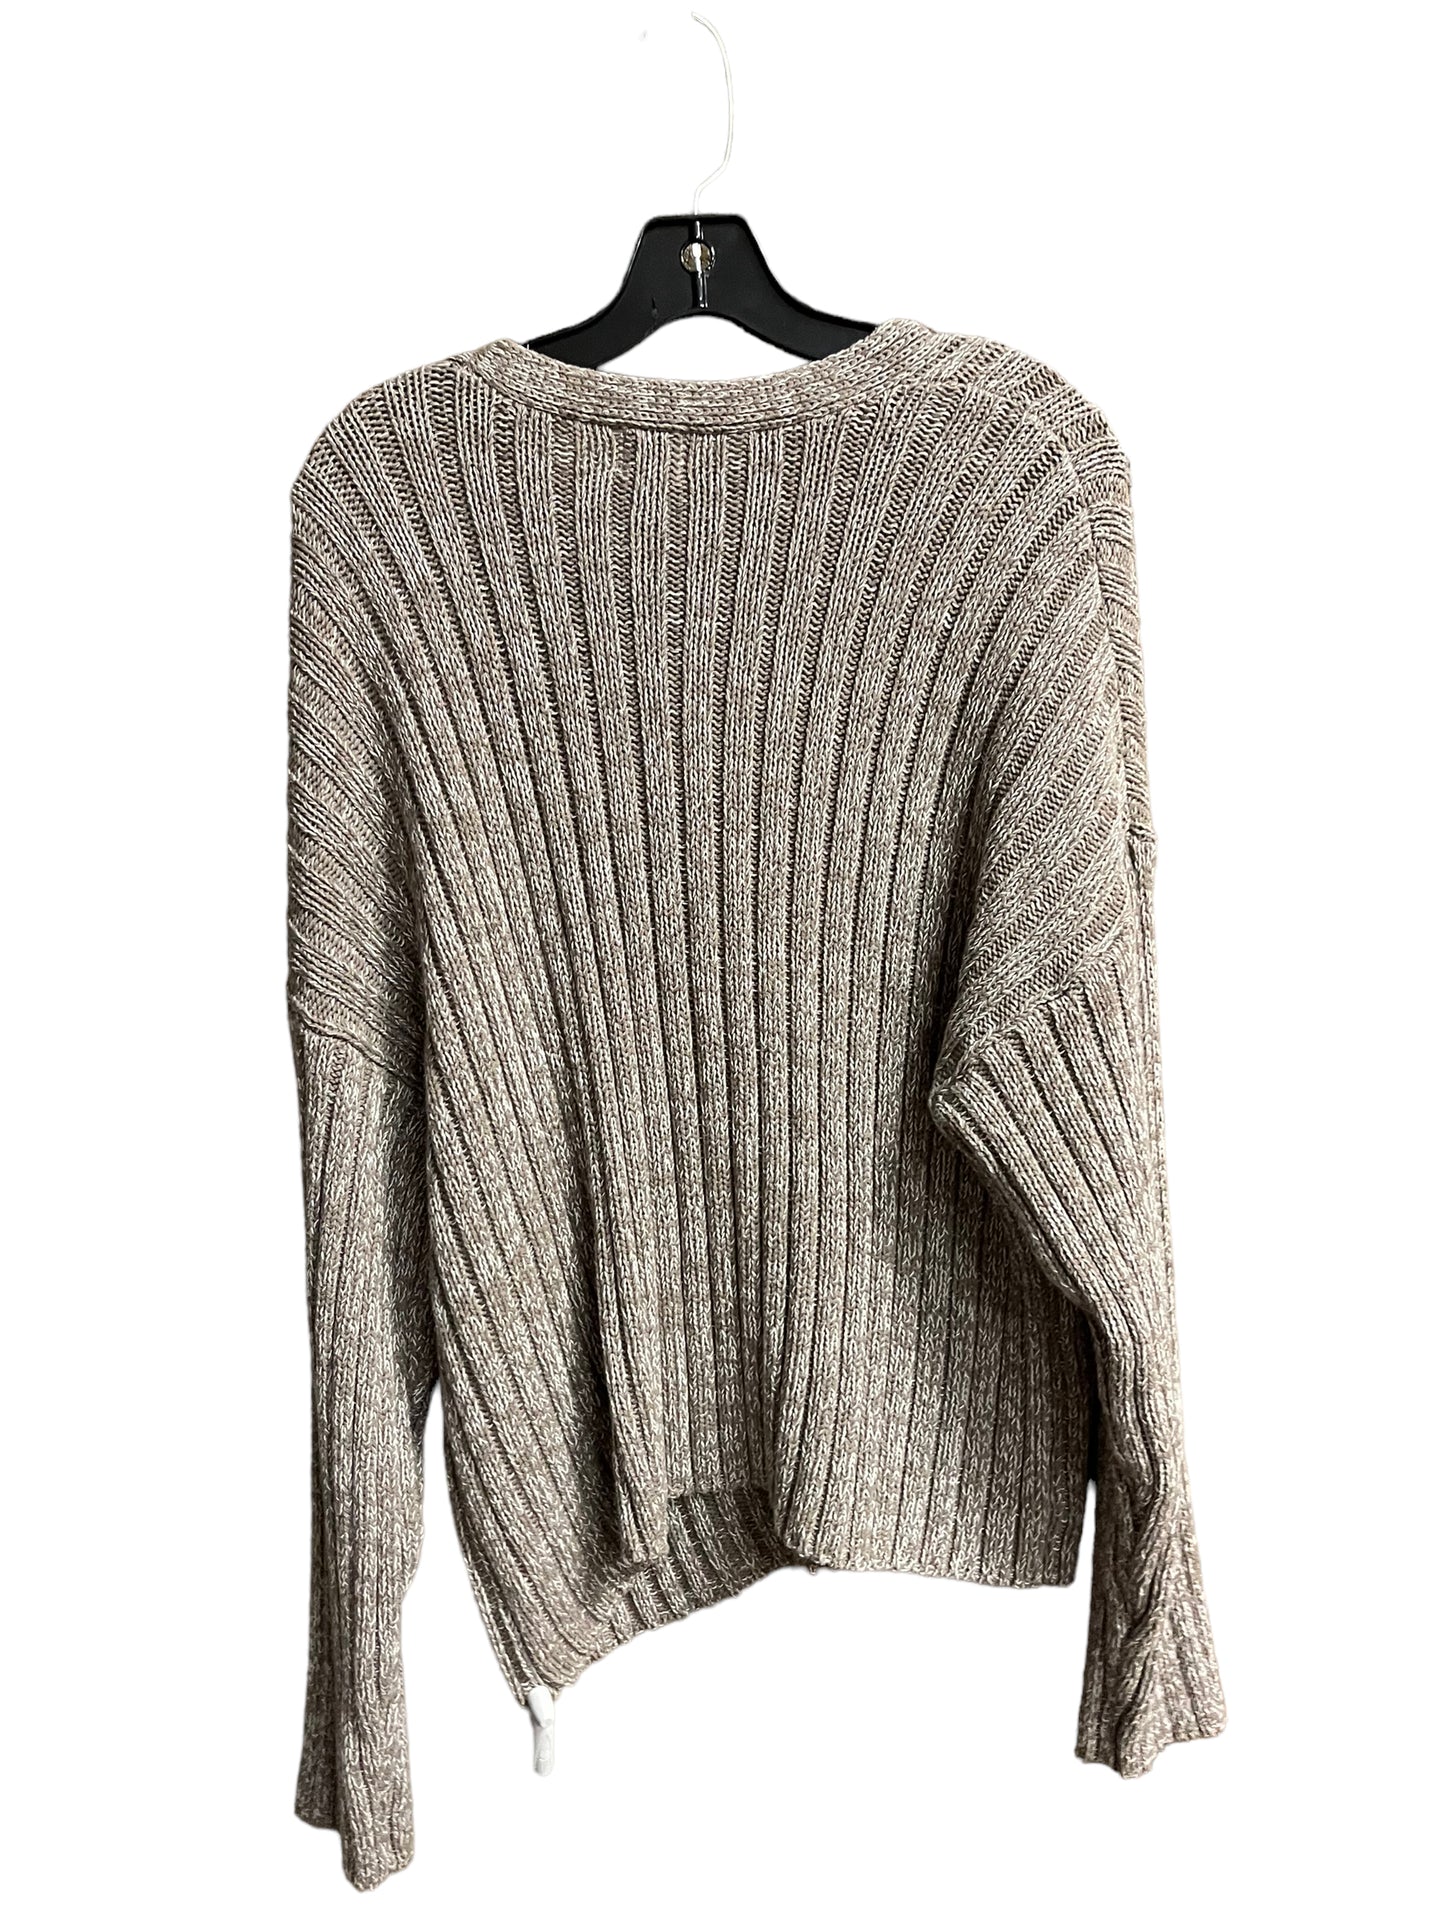 Sweater By A New Day  Size: Xl